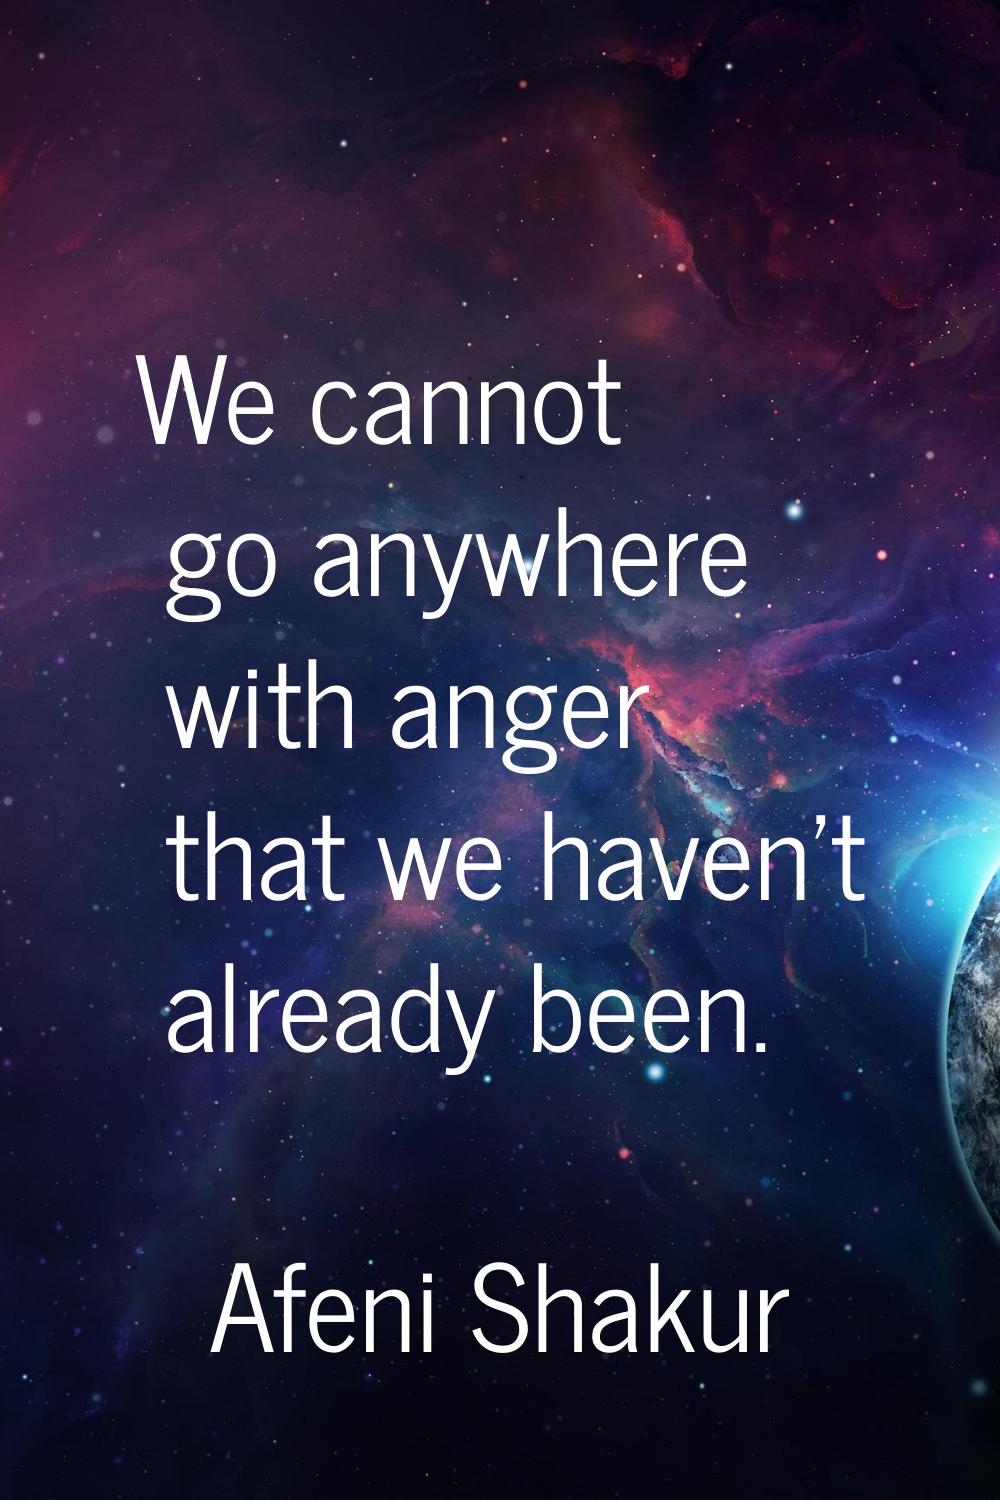 We cannot go anywhere with anger that we haven't already been.